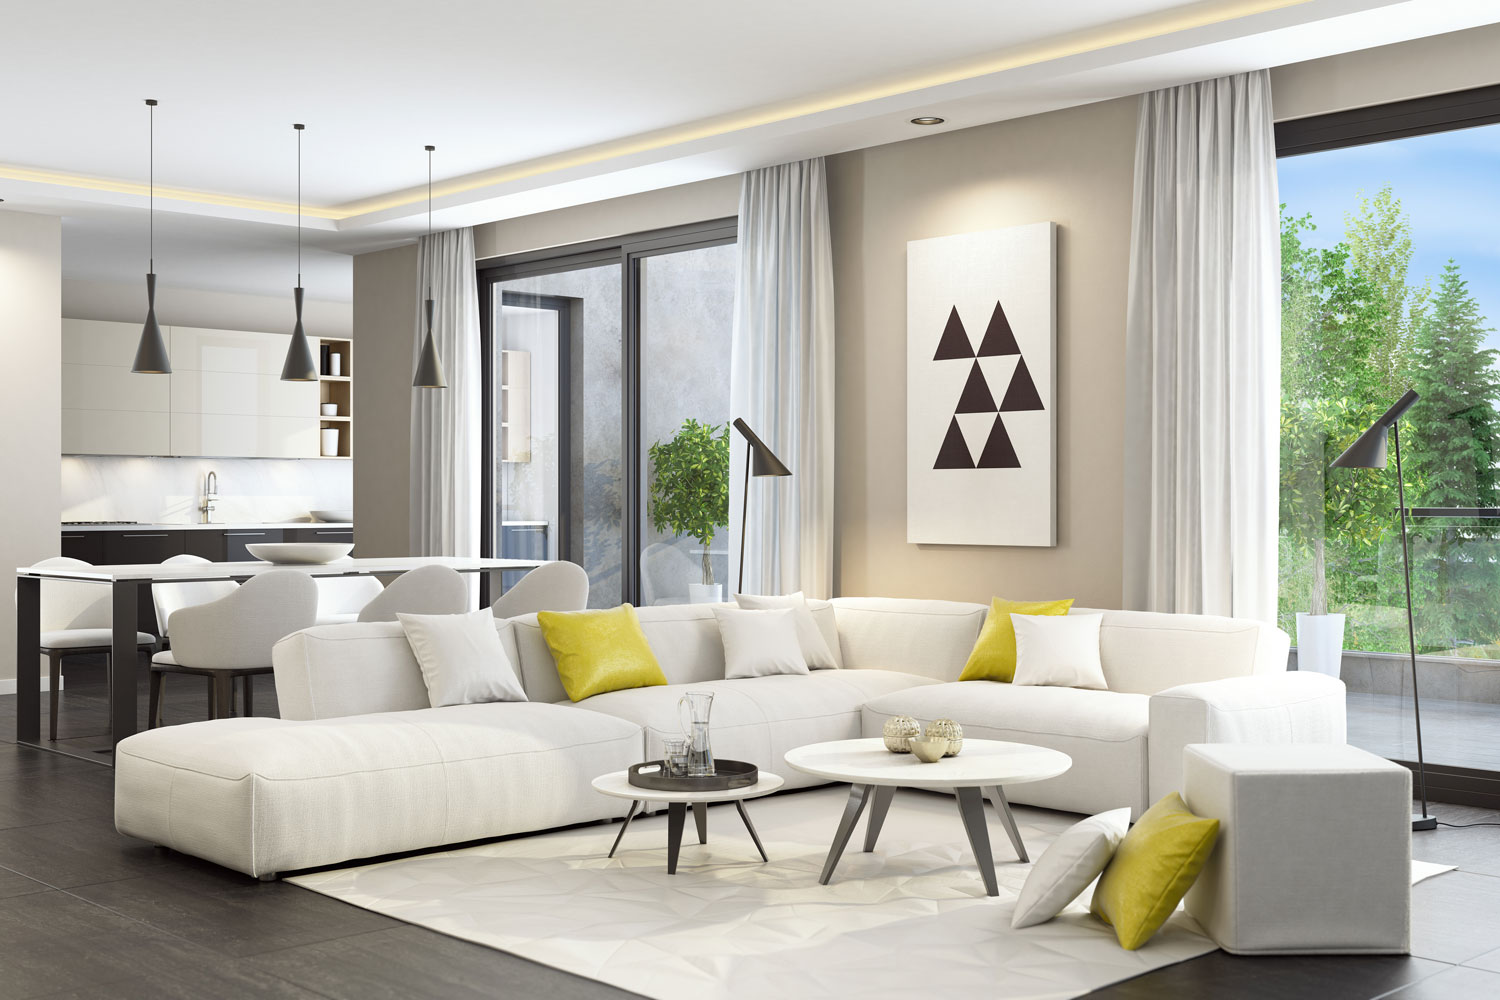 A sectional sofa with white and yellow throw pillows inside an ultra contemporary living room with dangling lamps on the dining table